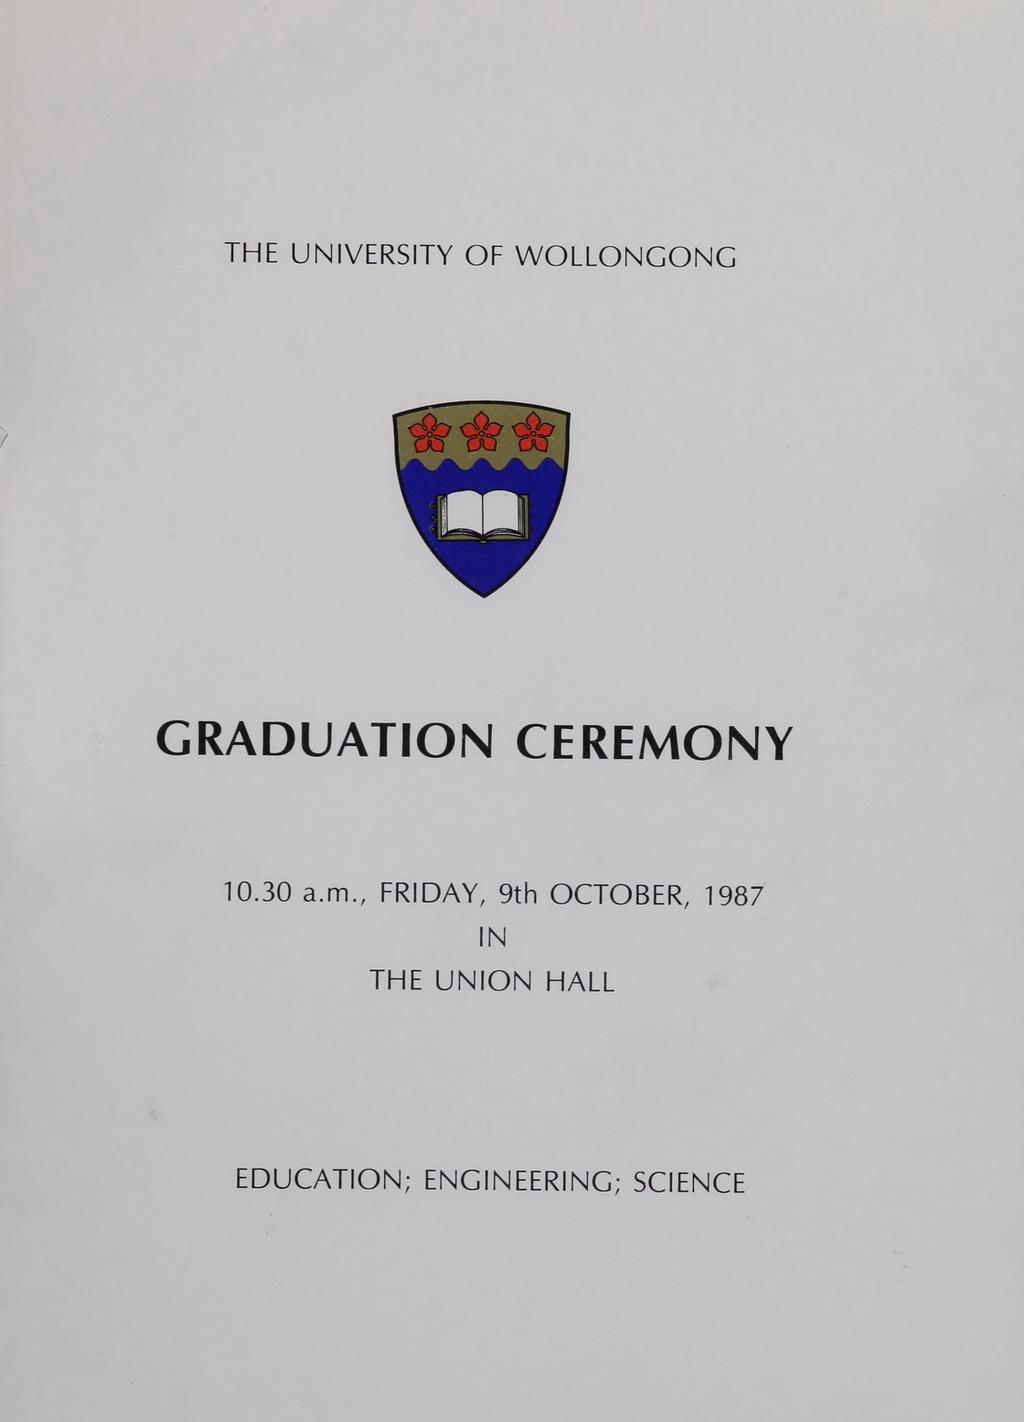 THE UN IVERS ITY OF WOLLONGONG GRADUATION CEREMONY 10.30 a.m.